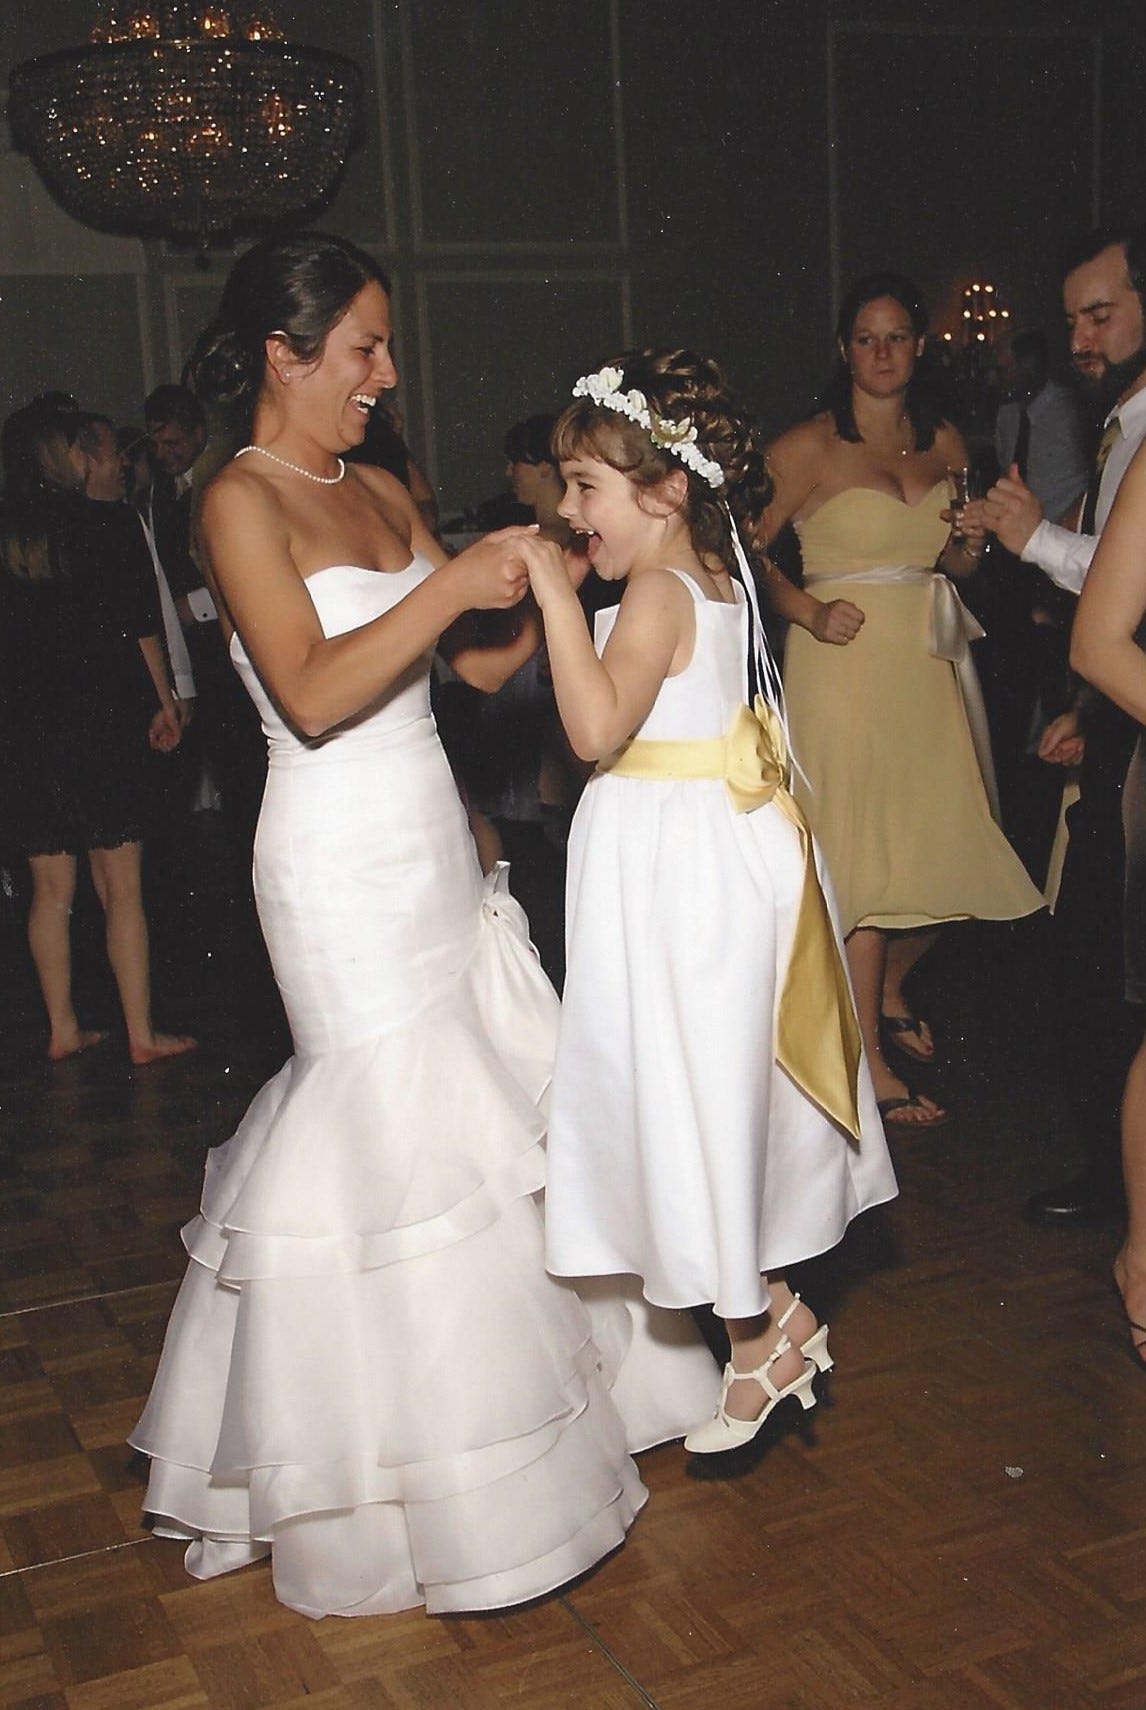 Bride dances with the flower girl, who is having the time of her life